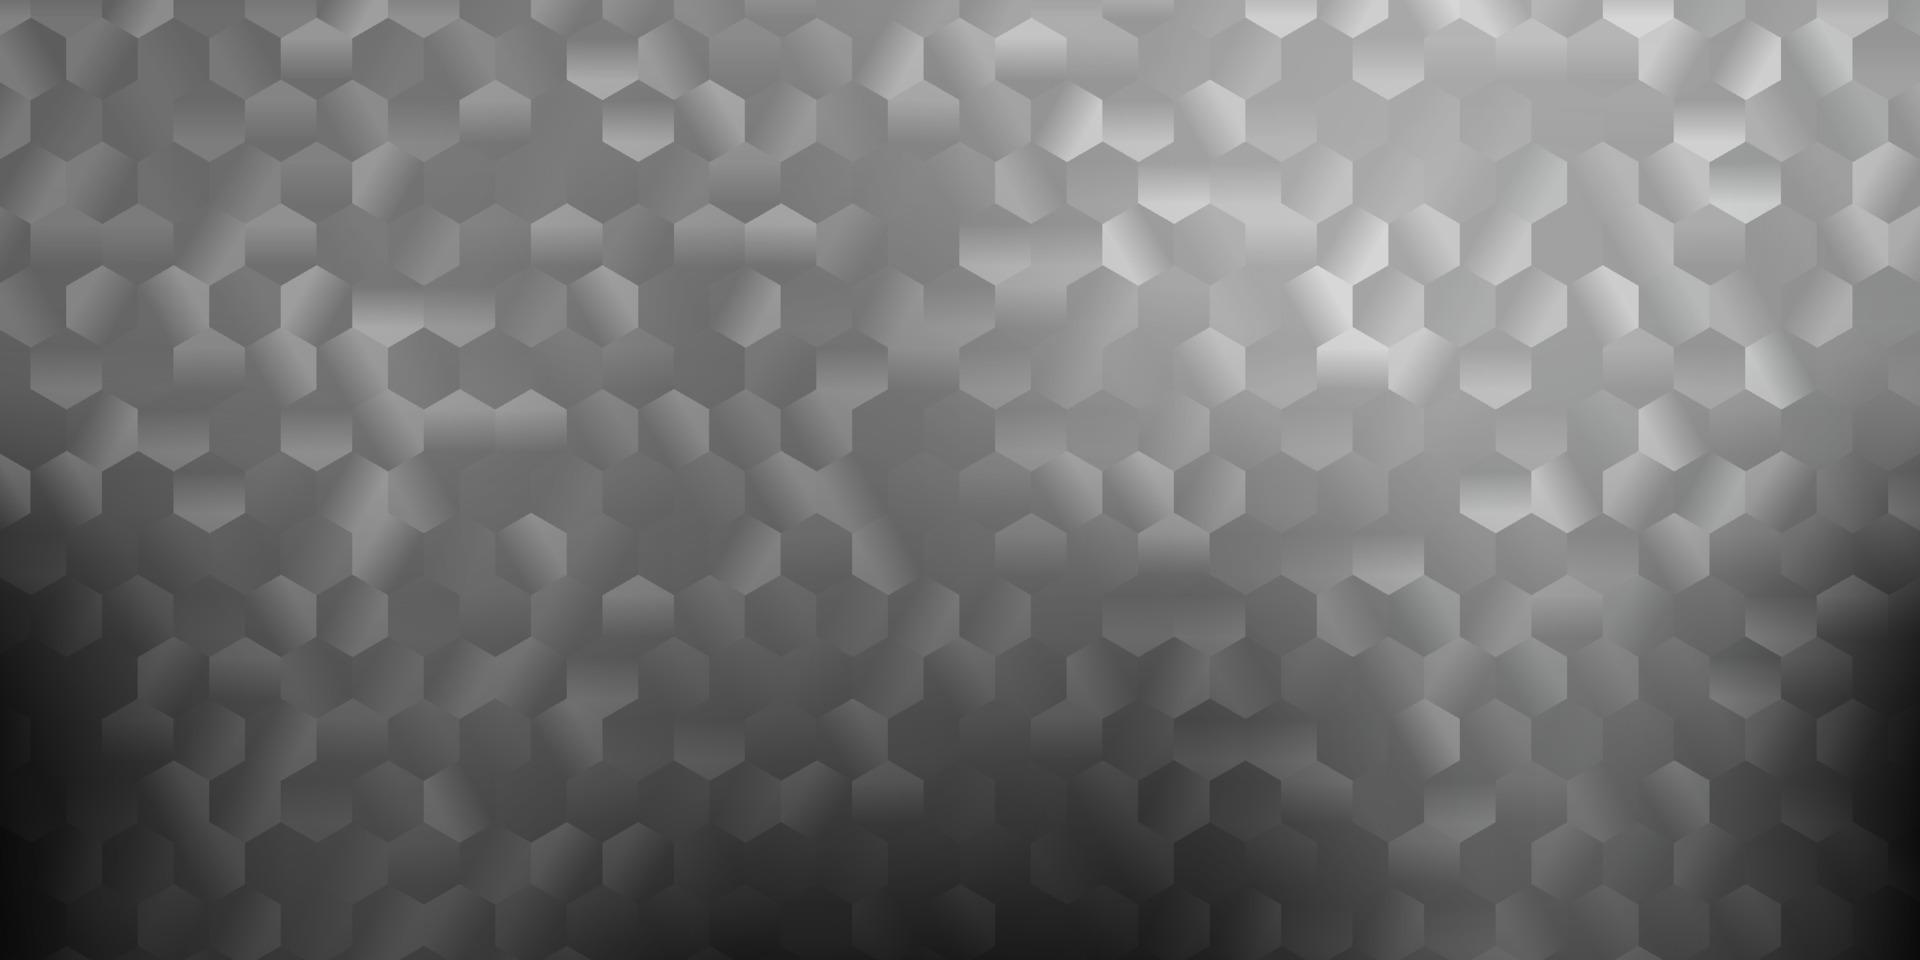 Light gray vector background with hexagonal shapes.